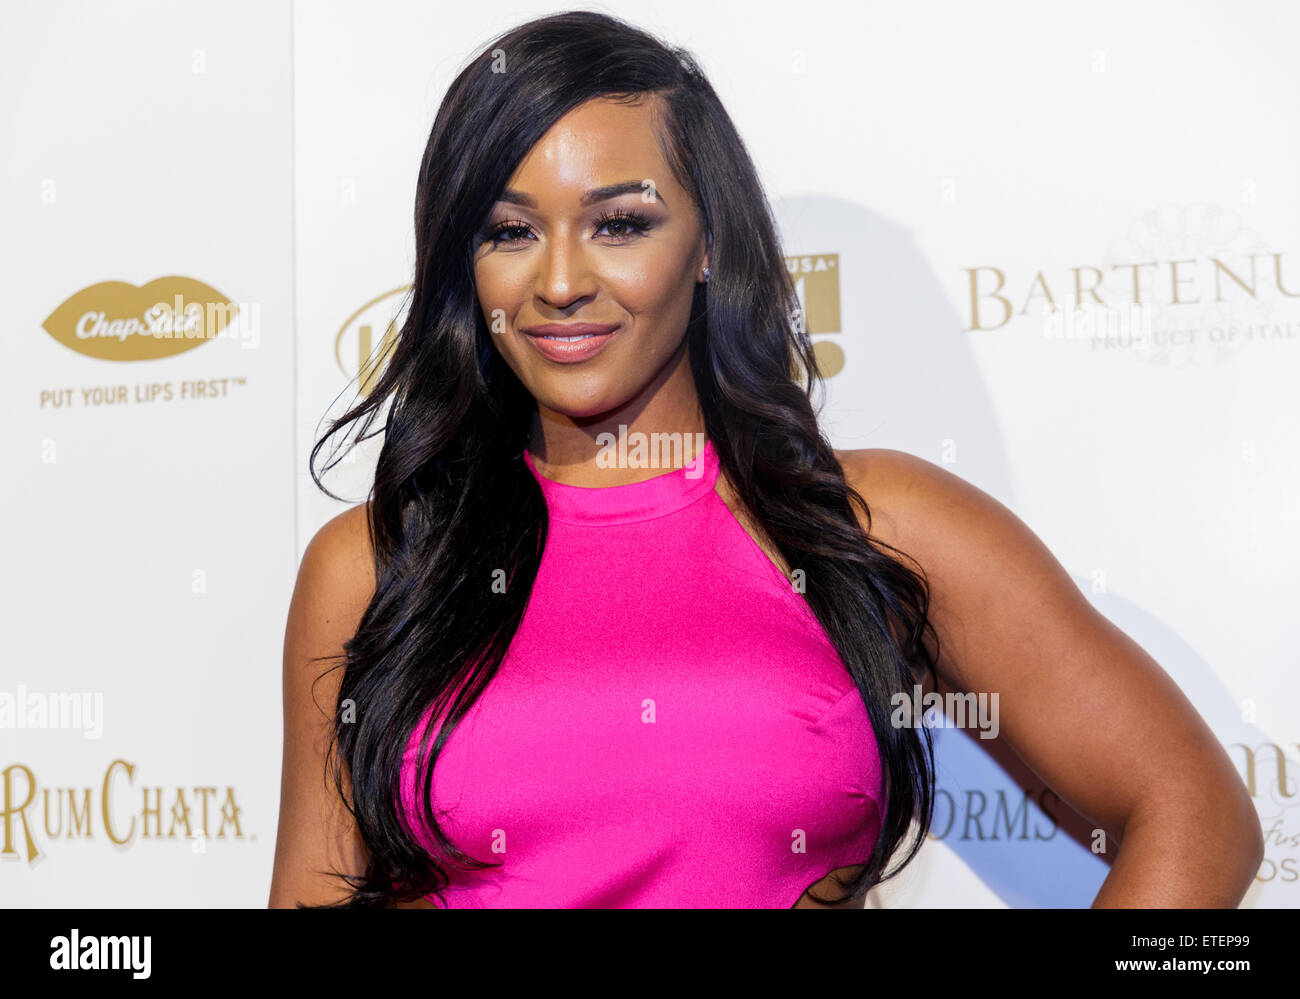 OK! Magazine pre-Grammy party at Lure Nightclub with a performance by Nico & Vinz  Featuring: Brandi Maxwell Where: Los Angeles, California, United States When: 05 Feb 2015 Credit: WENN.com Stock Photo